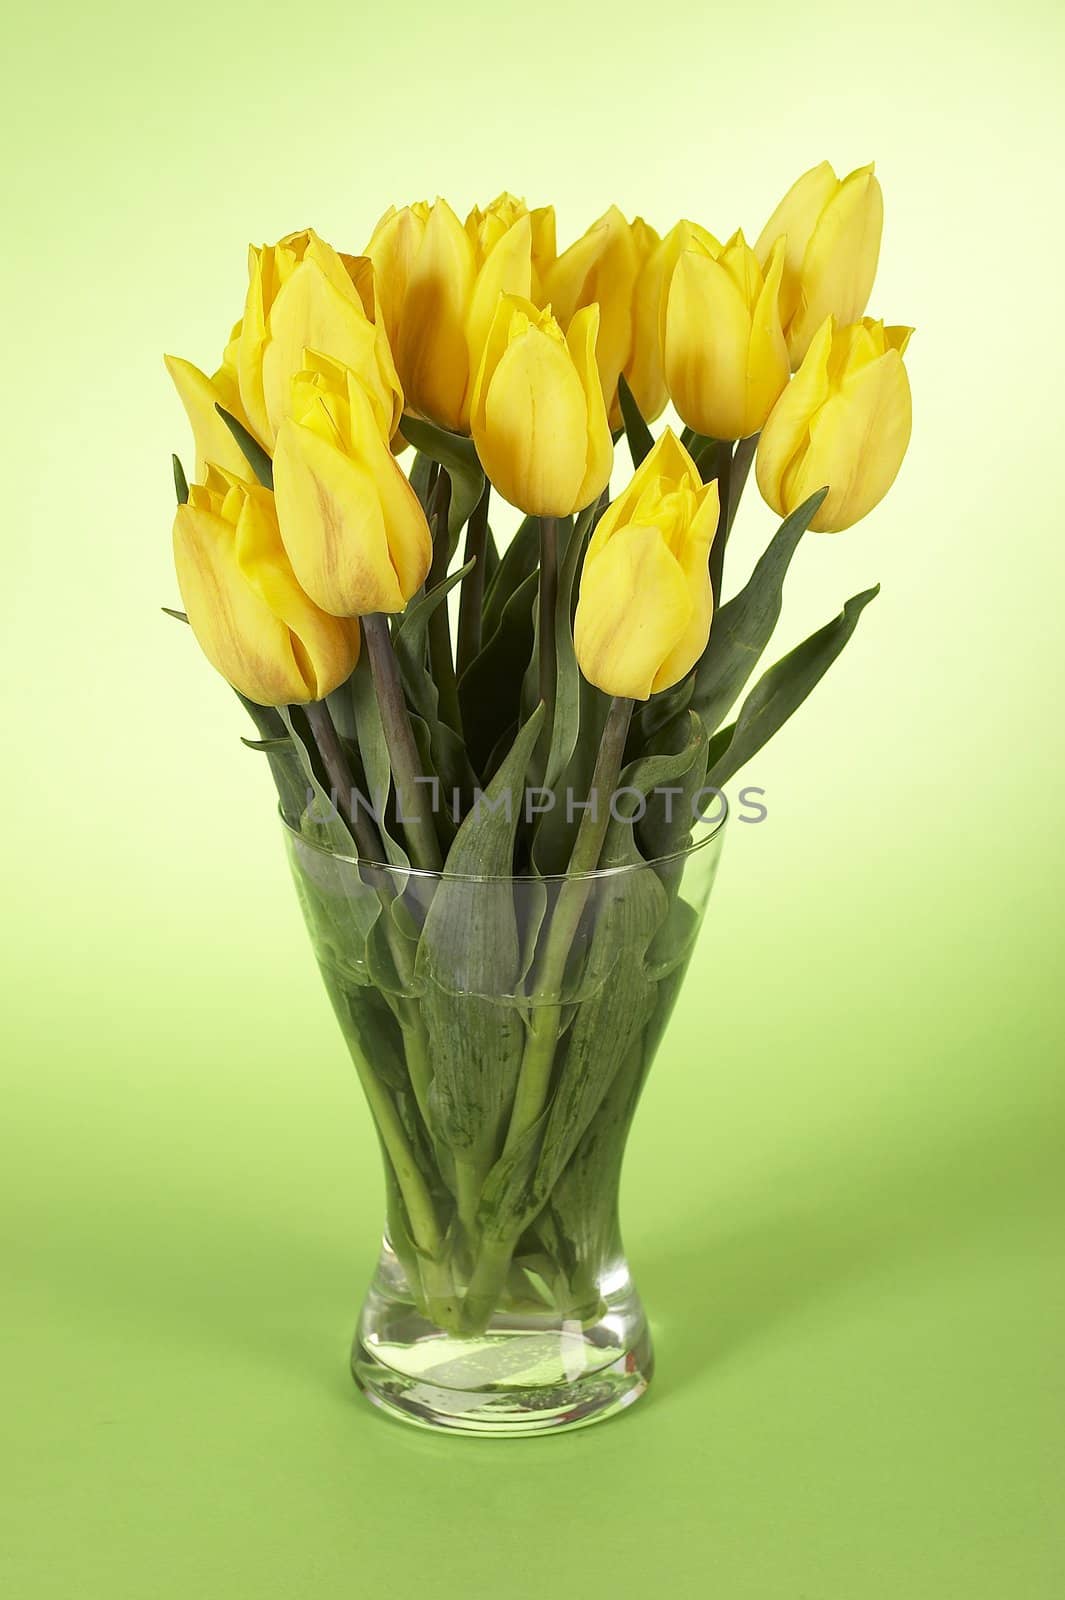 yellow bouquet